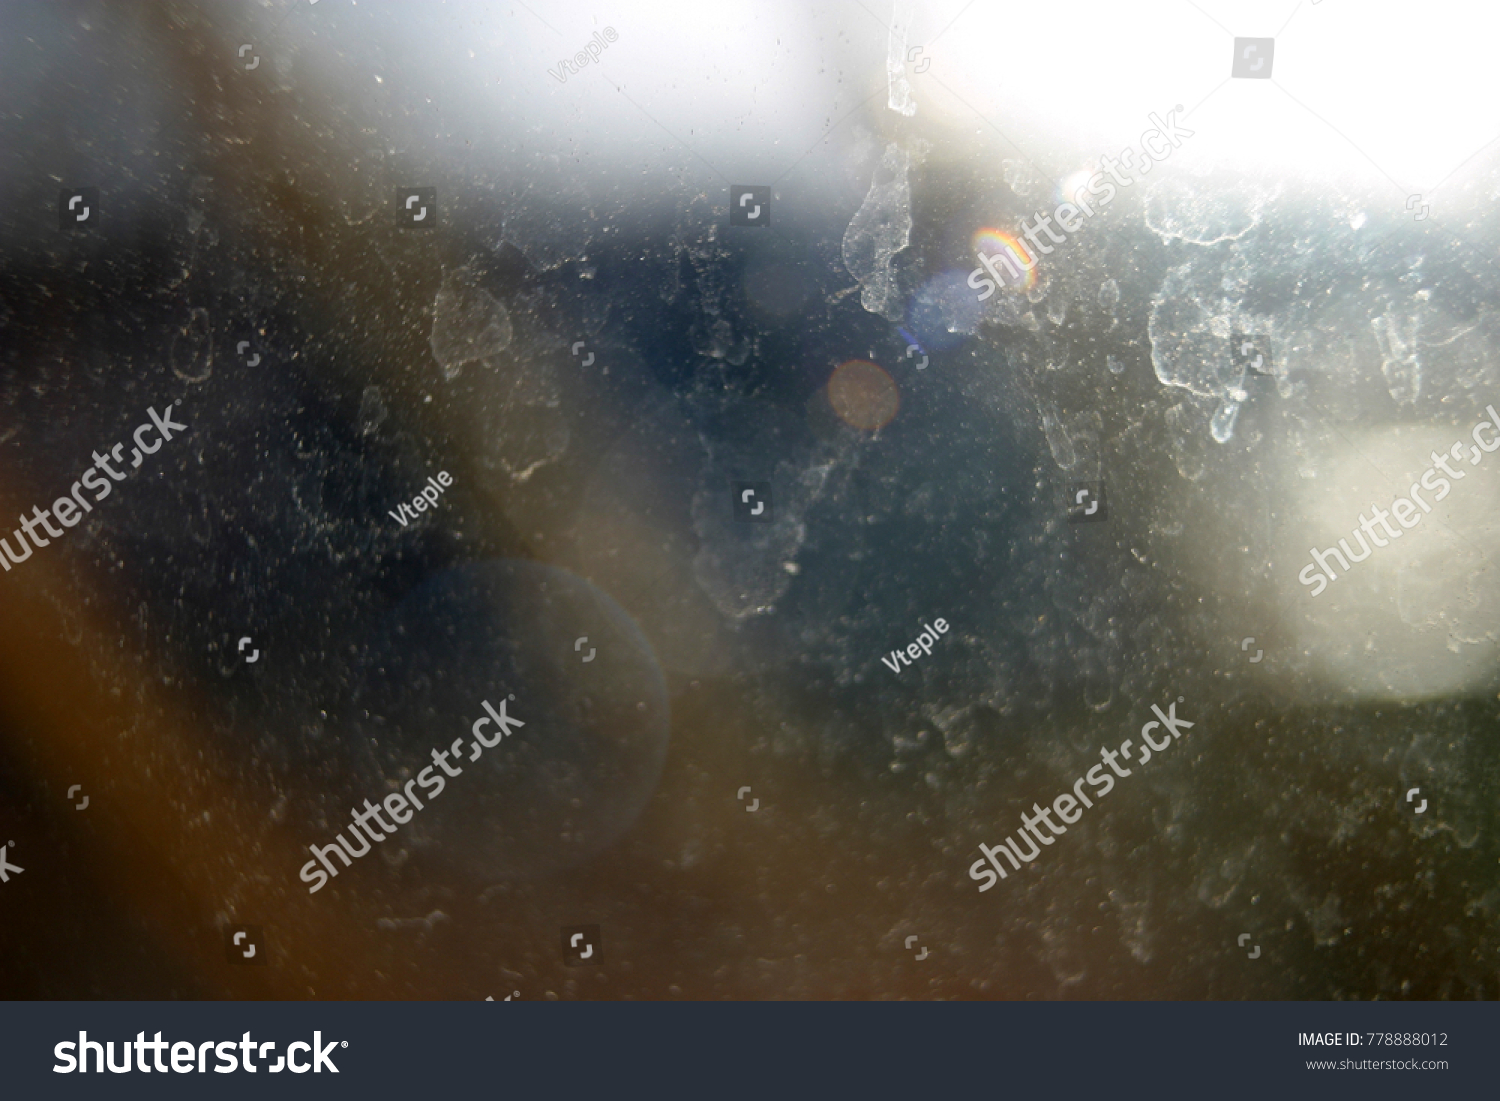 Dirty window with traces of soap, powder close-up #778888012